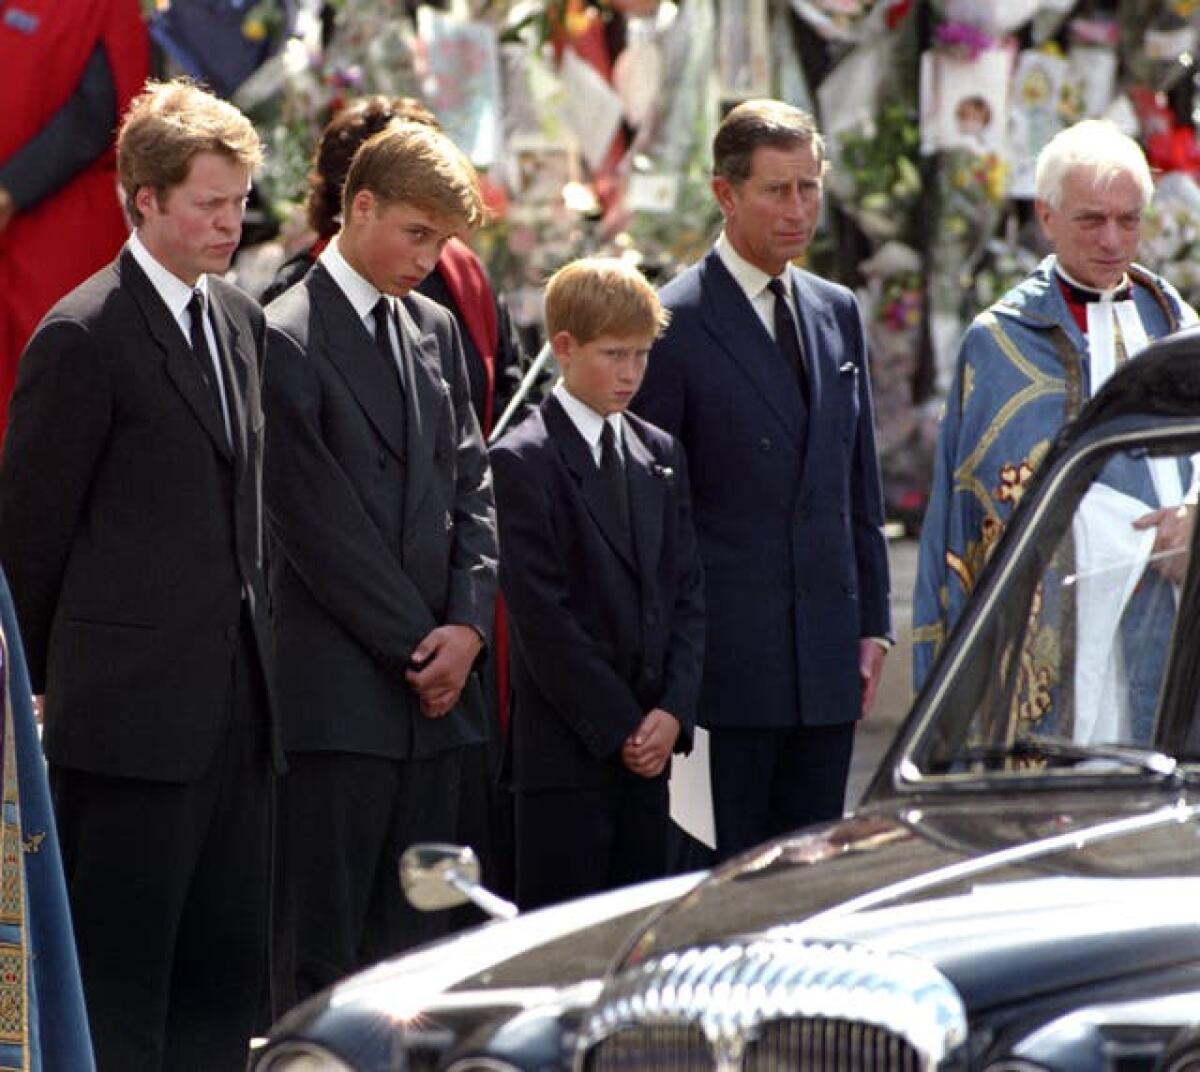 Harry on the day of Diana's funeral in 1997